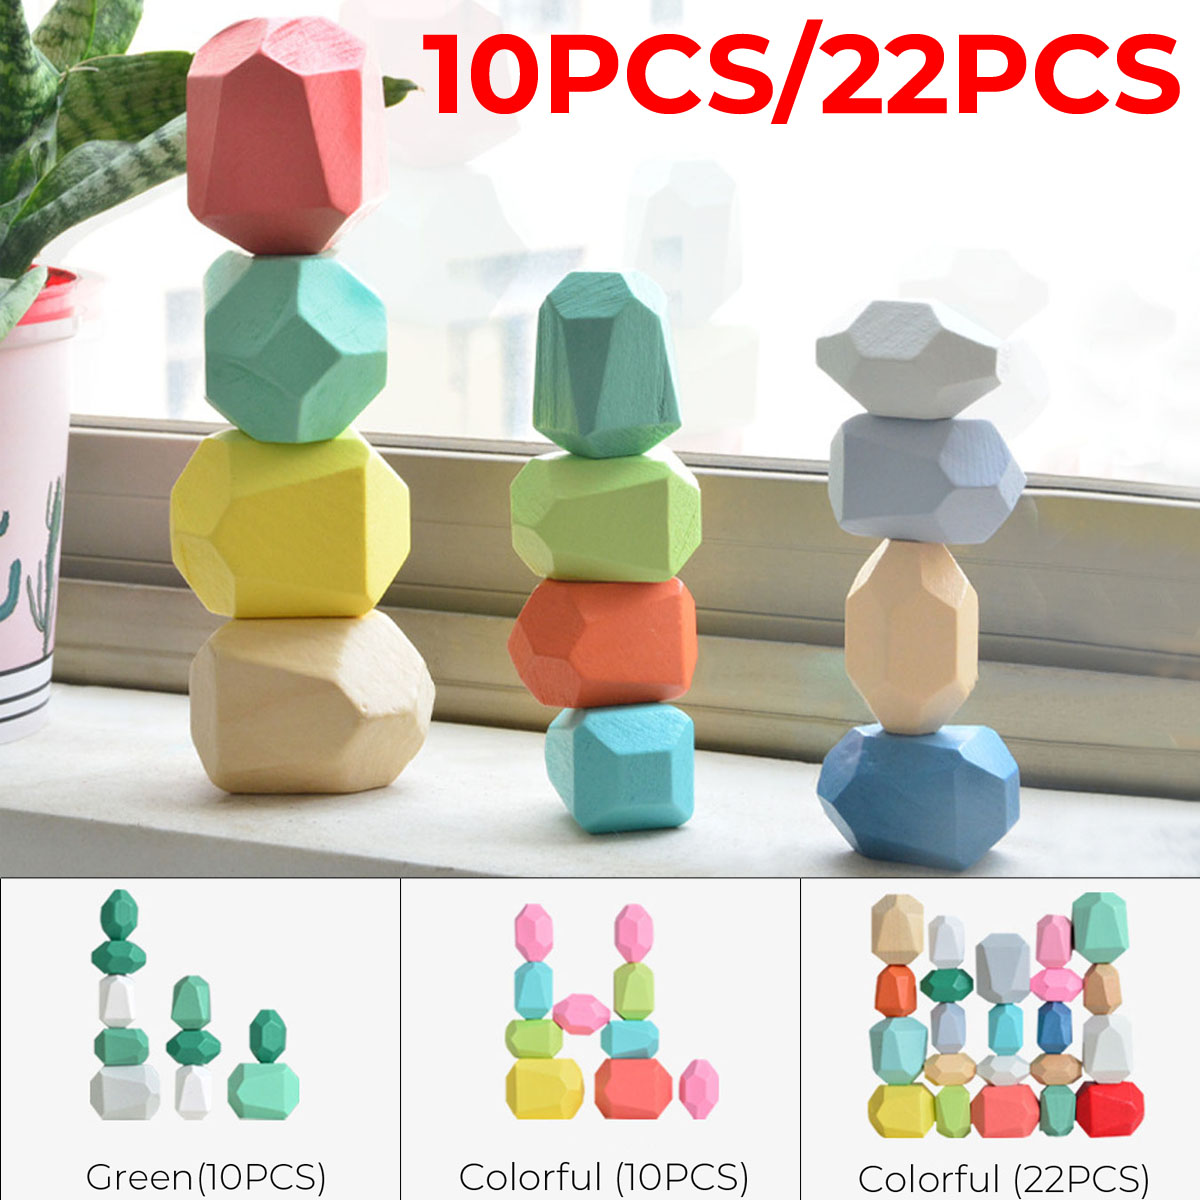 1022-Pcs-Wooden-Colorful-Building-Blocks-Stone-Stacking-Game-Early-Educational-Toy-for-Kids-Gift-1891373-1